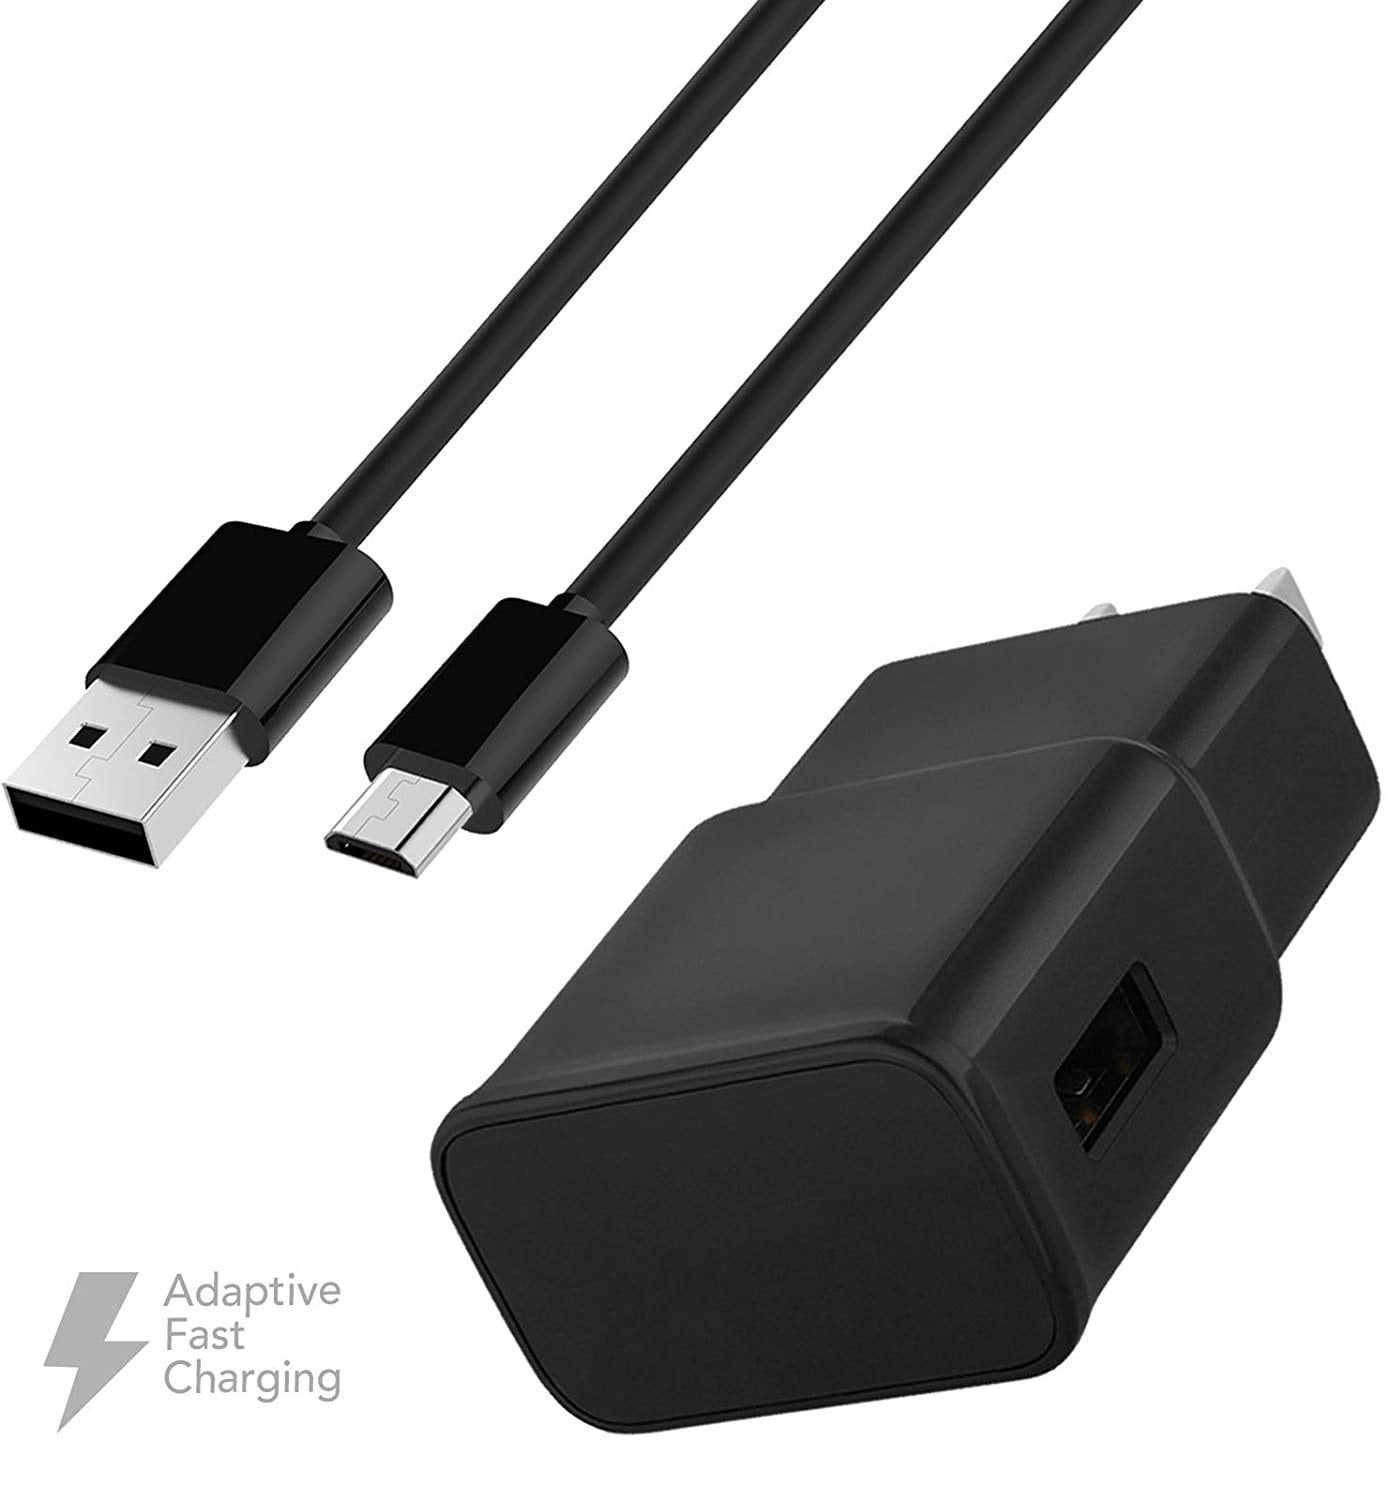 Authentic Xiaomi Mi 4s Quick Charge USB Type-C Data Charging and Transfer Cable. Black / 5Ft 